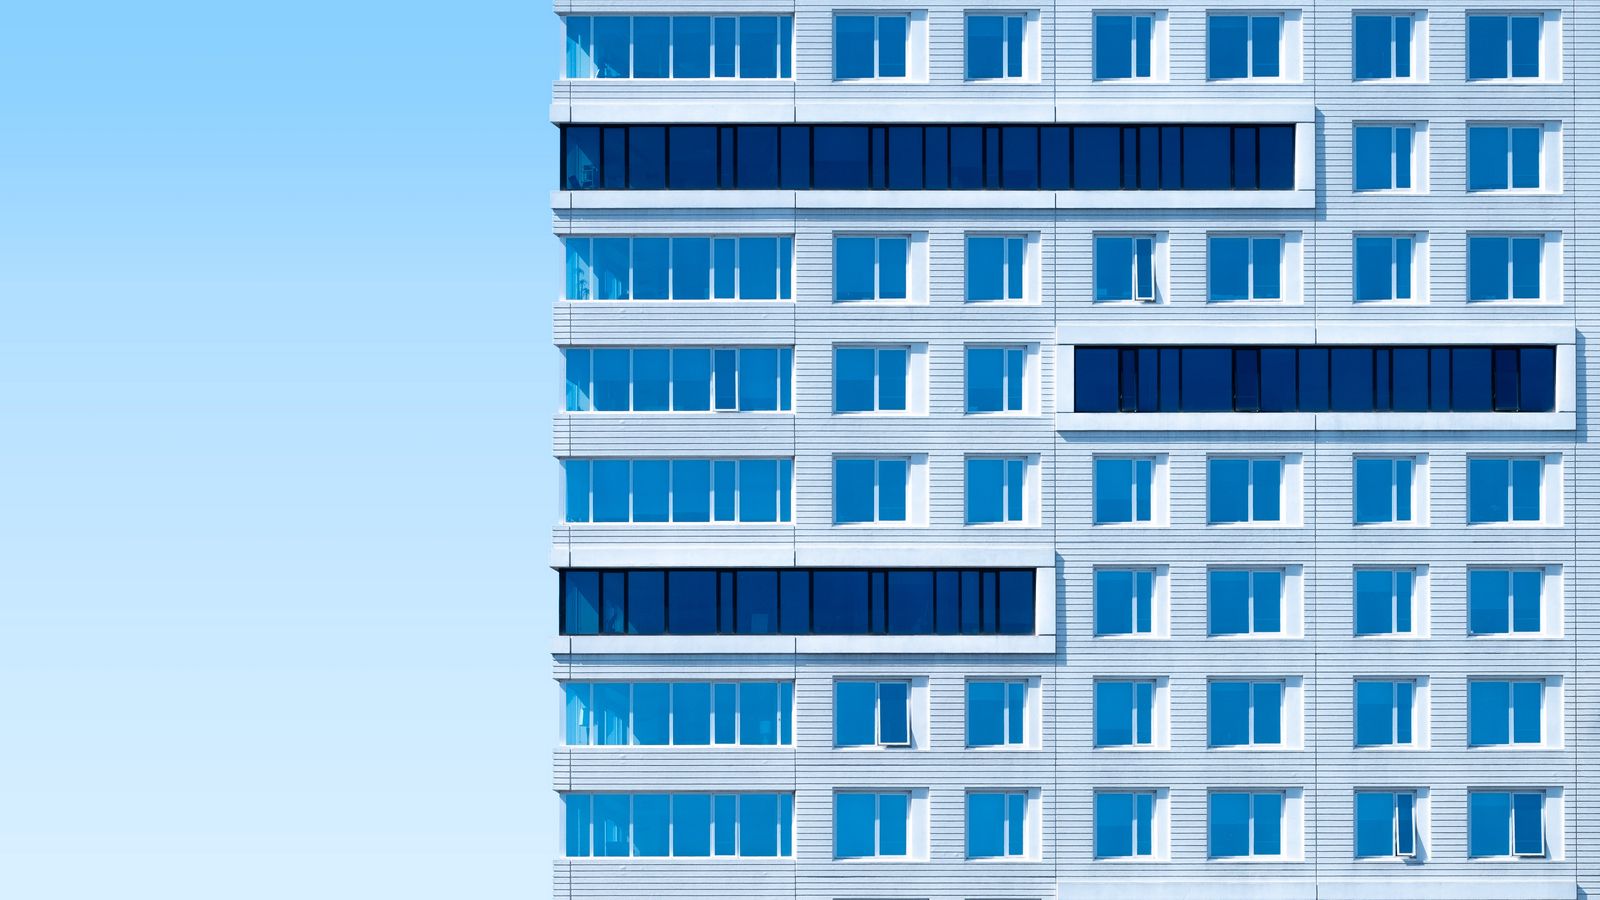 Download wallpaper 1600x900 building, architecture, sky, minimalism, blue, aesthetic widescreen 16:9 HD background